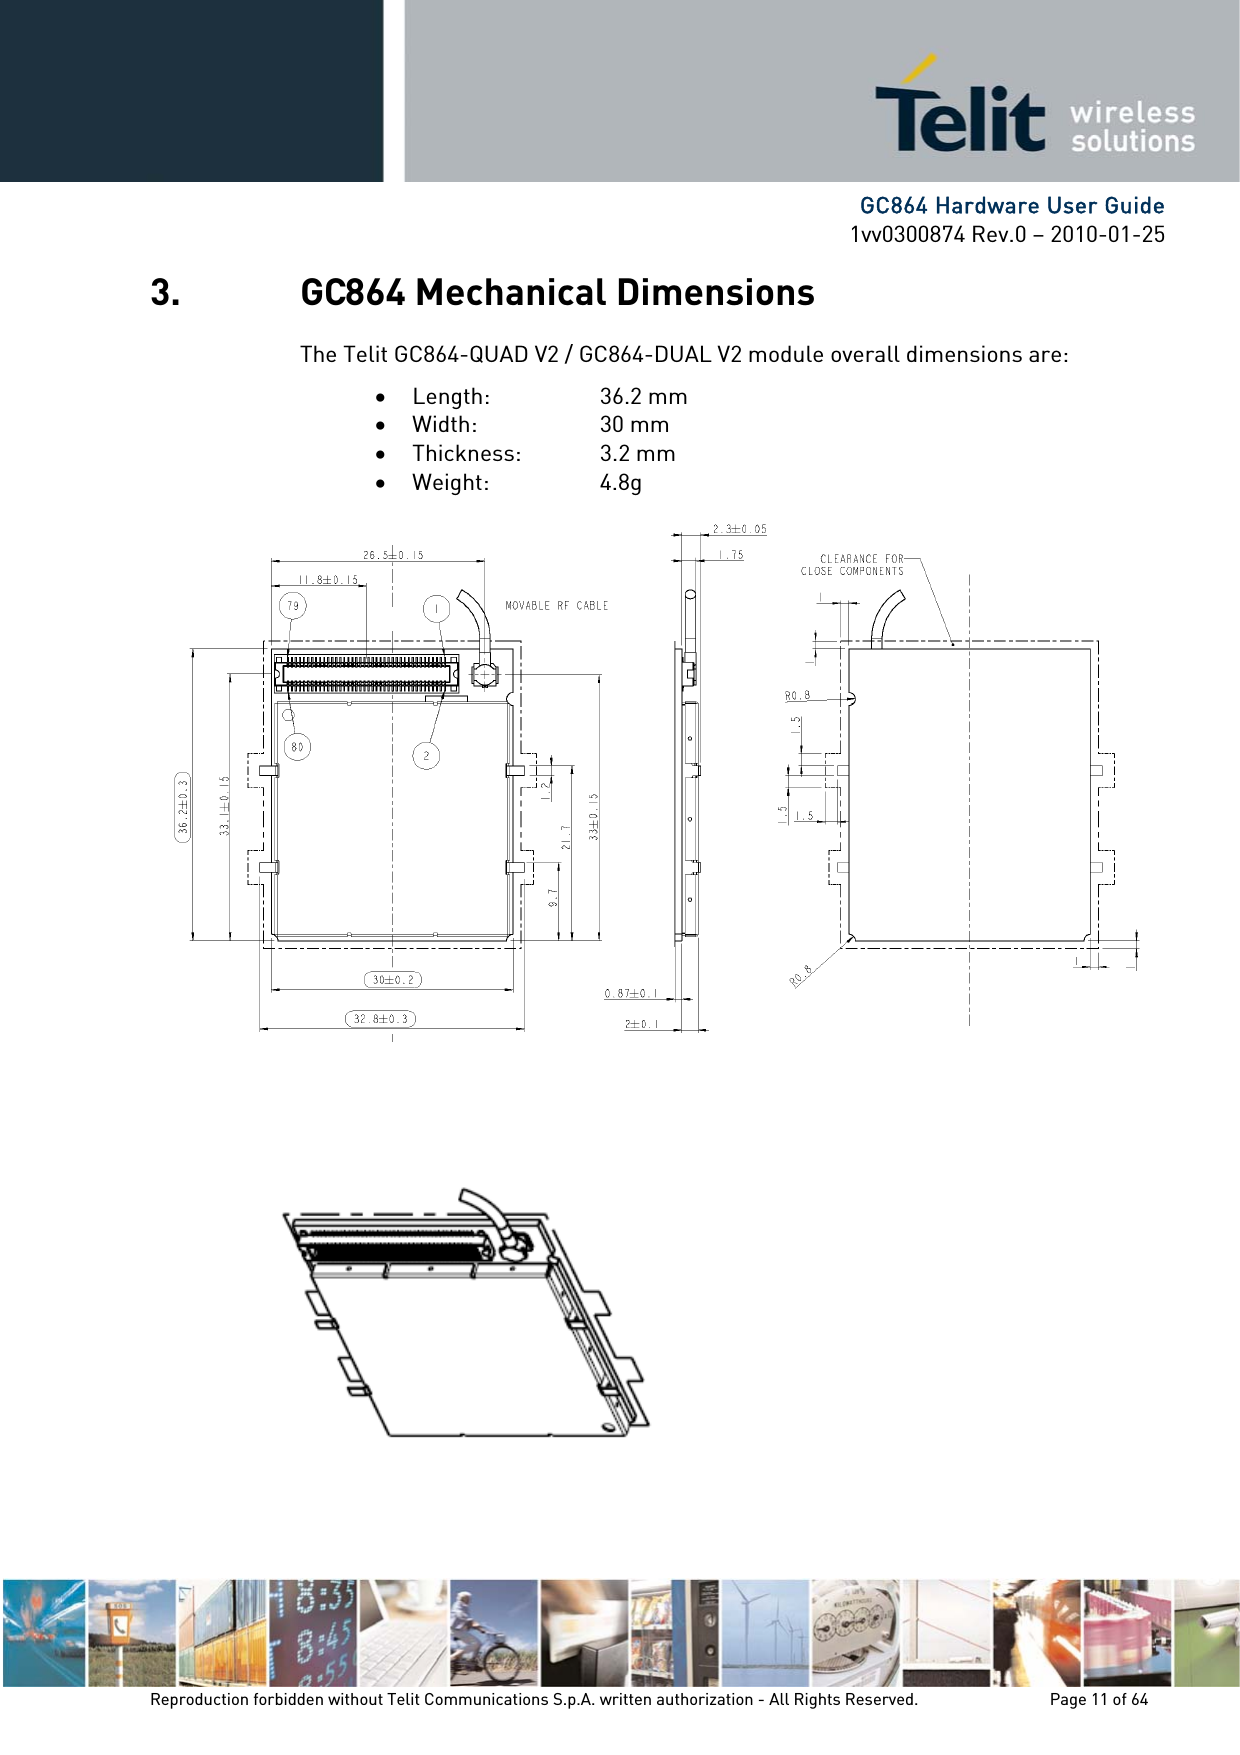      GC864 Hardware User Guide 1vv0300874 Rev.0 – 2010-01-25 Reproduction forbidden without Telit Communications S.p.A. written authorization - All Rights Reserved.    Page 11 of 64  3. GC864 Mechanical Dimensions The Telit GC864-QUAD V2 / GC864-DUAL V2 module overall dimensions are: • Length:   36.2 mm • Width:   30 mm • Thickness:   3.2 mm • Weight:     4.8g    